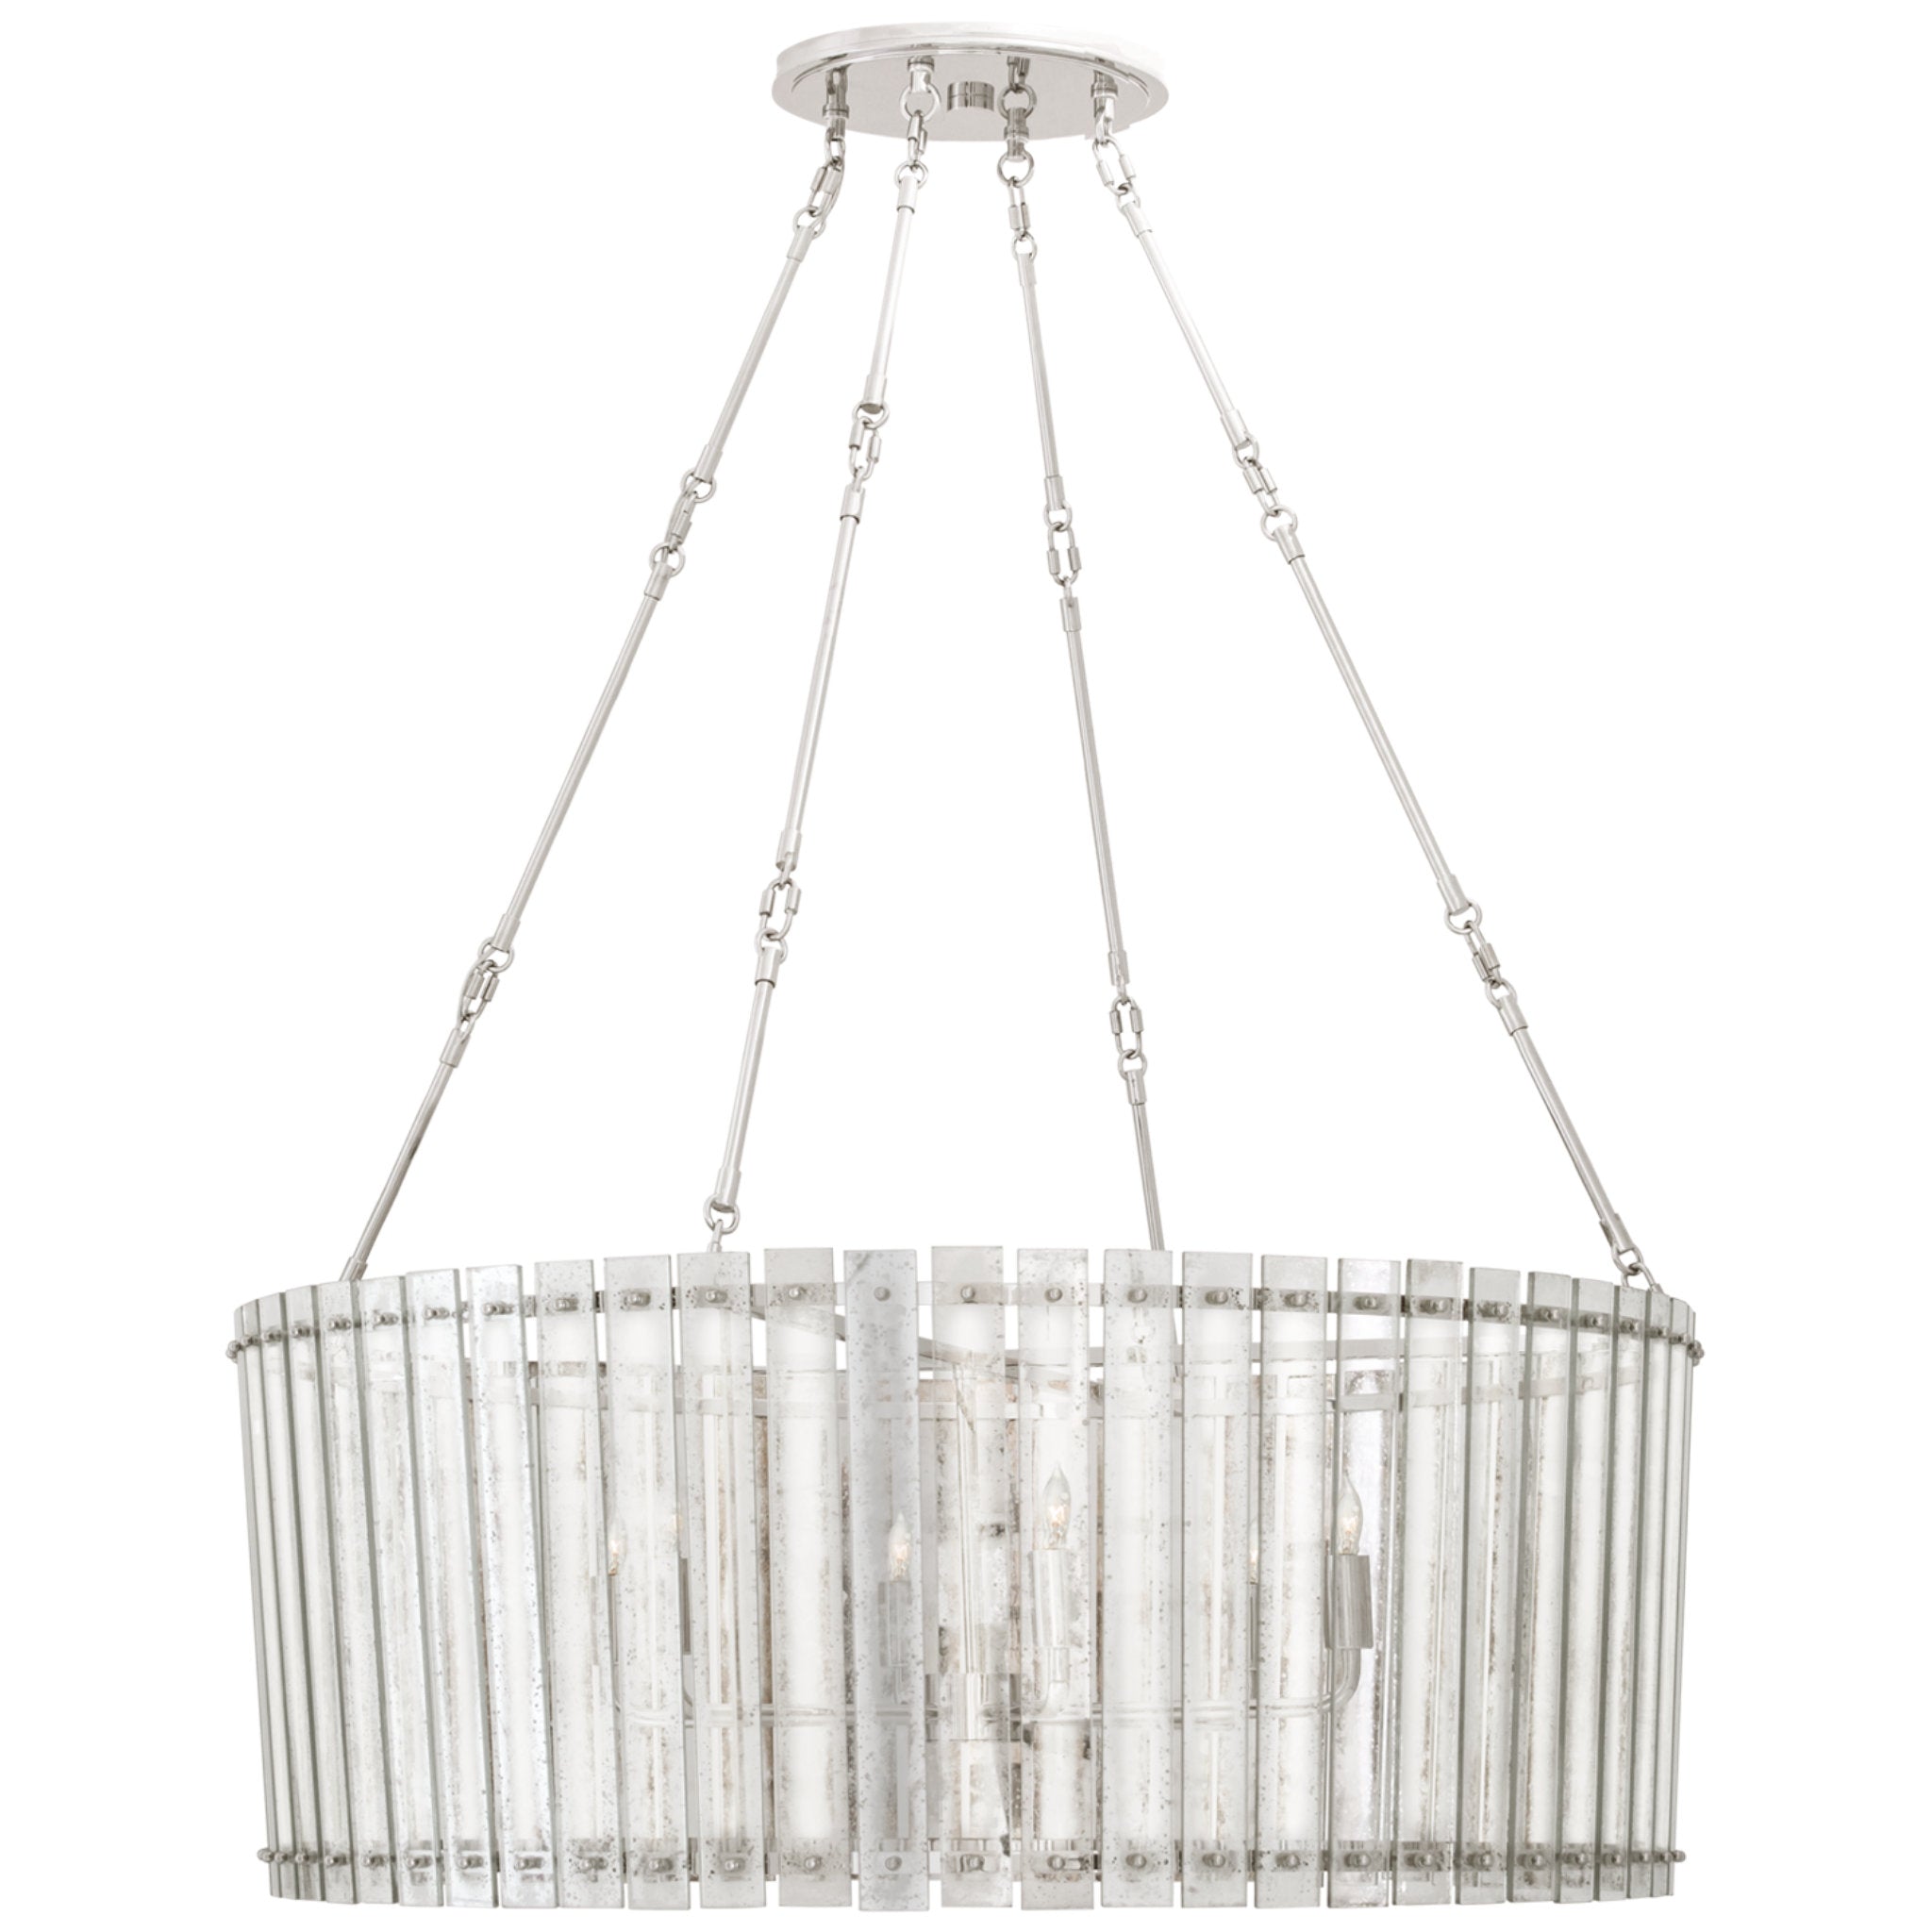 Carrier and Company Cadence Large Chandelier in Polished Nickel with Antique Mirror